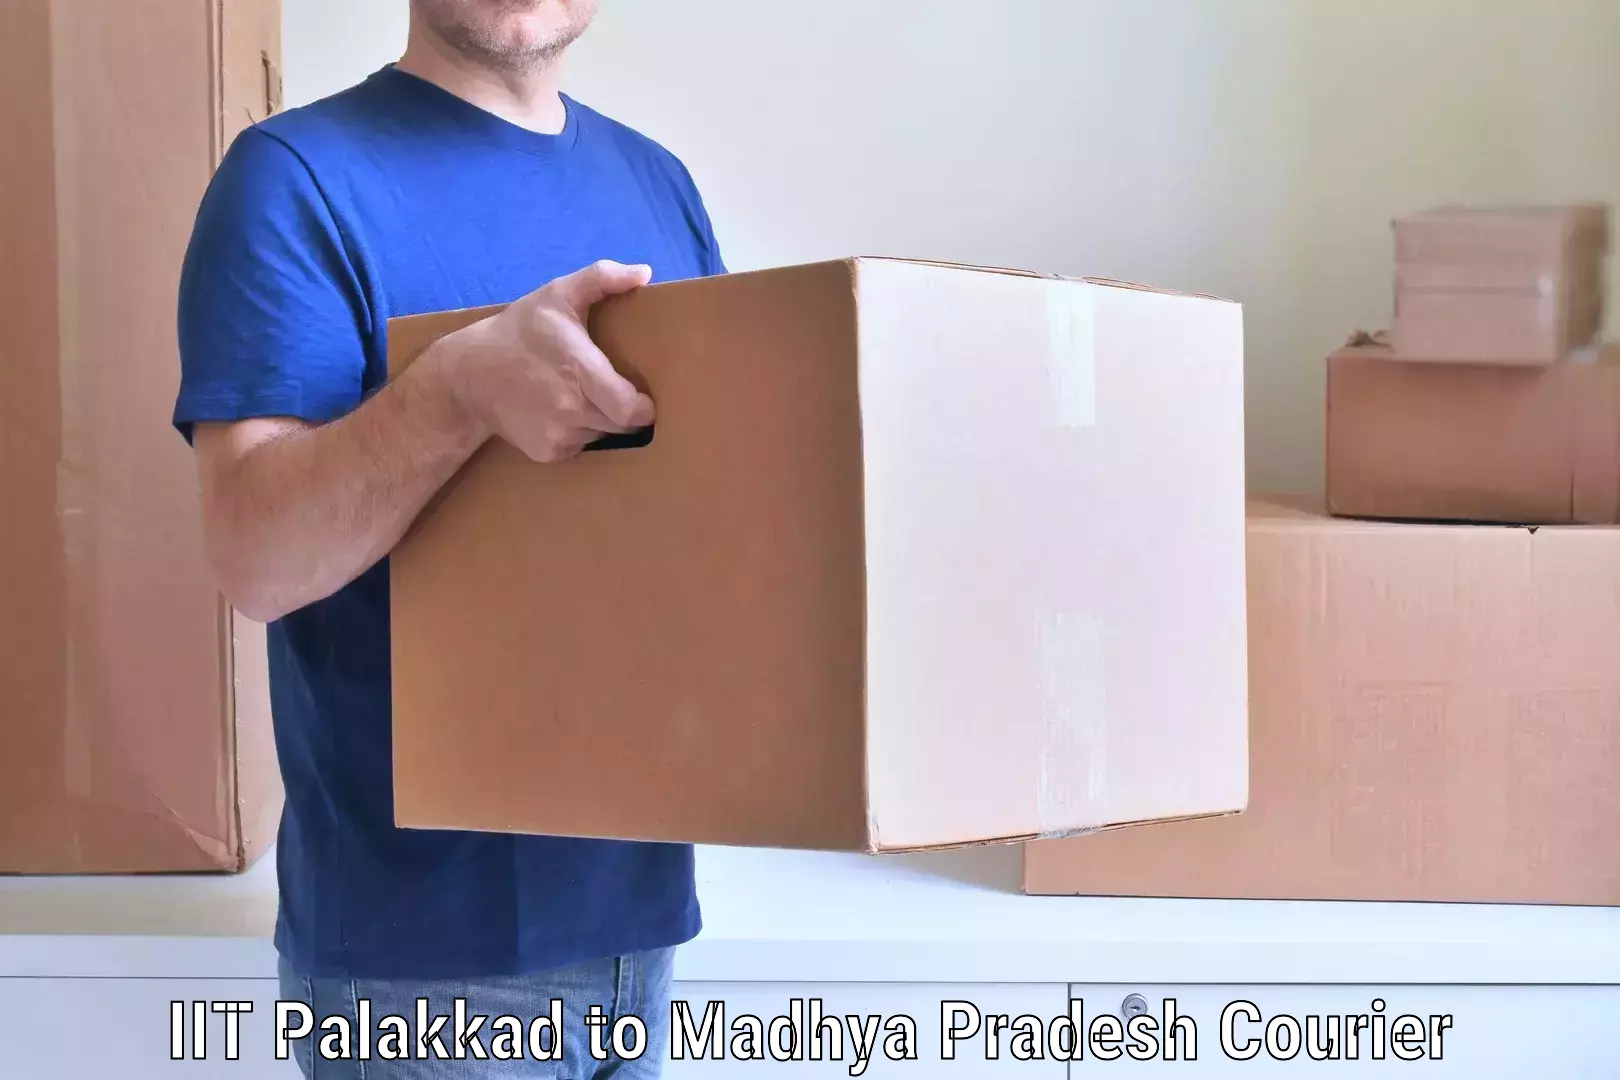 Furniture relocation experts IIT Palakkad to Garoth